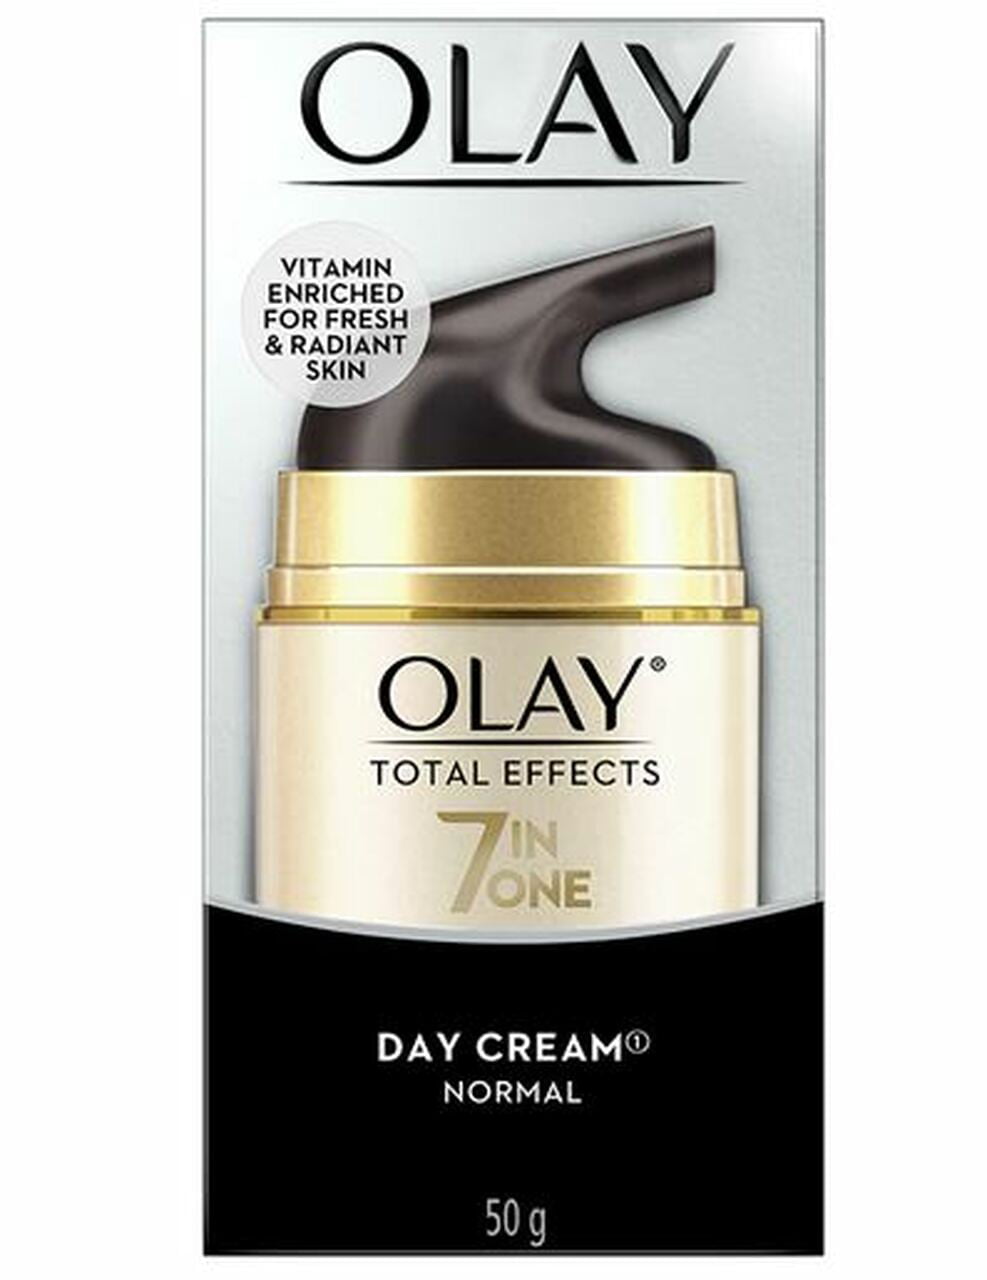 Olay Total Effects 7 1 Day Cream Normal 50gr/1.7oz - Walmart.com